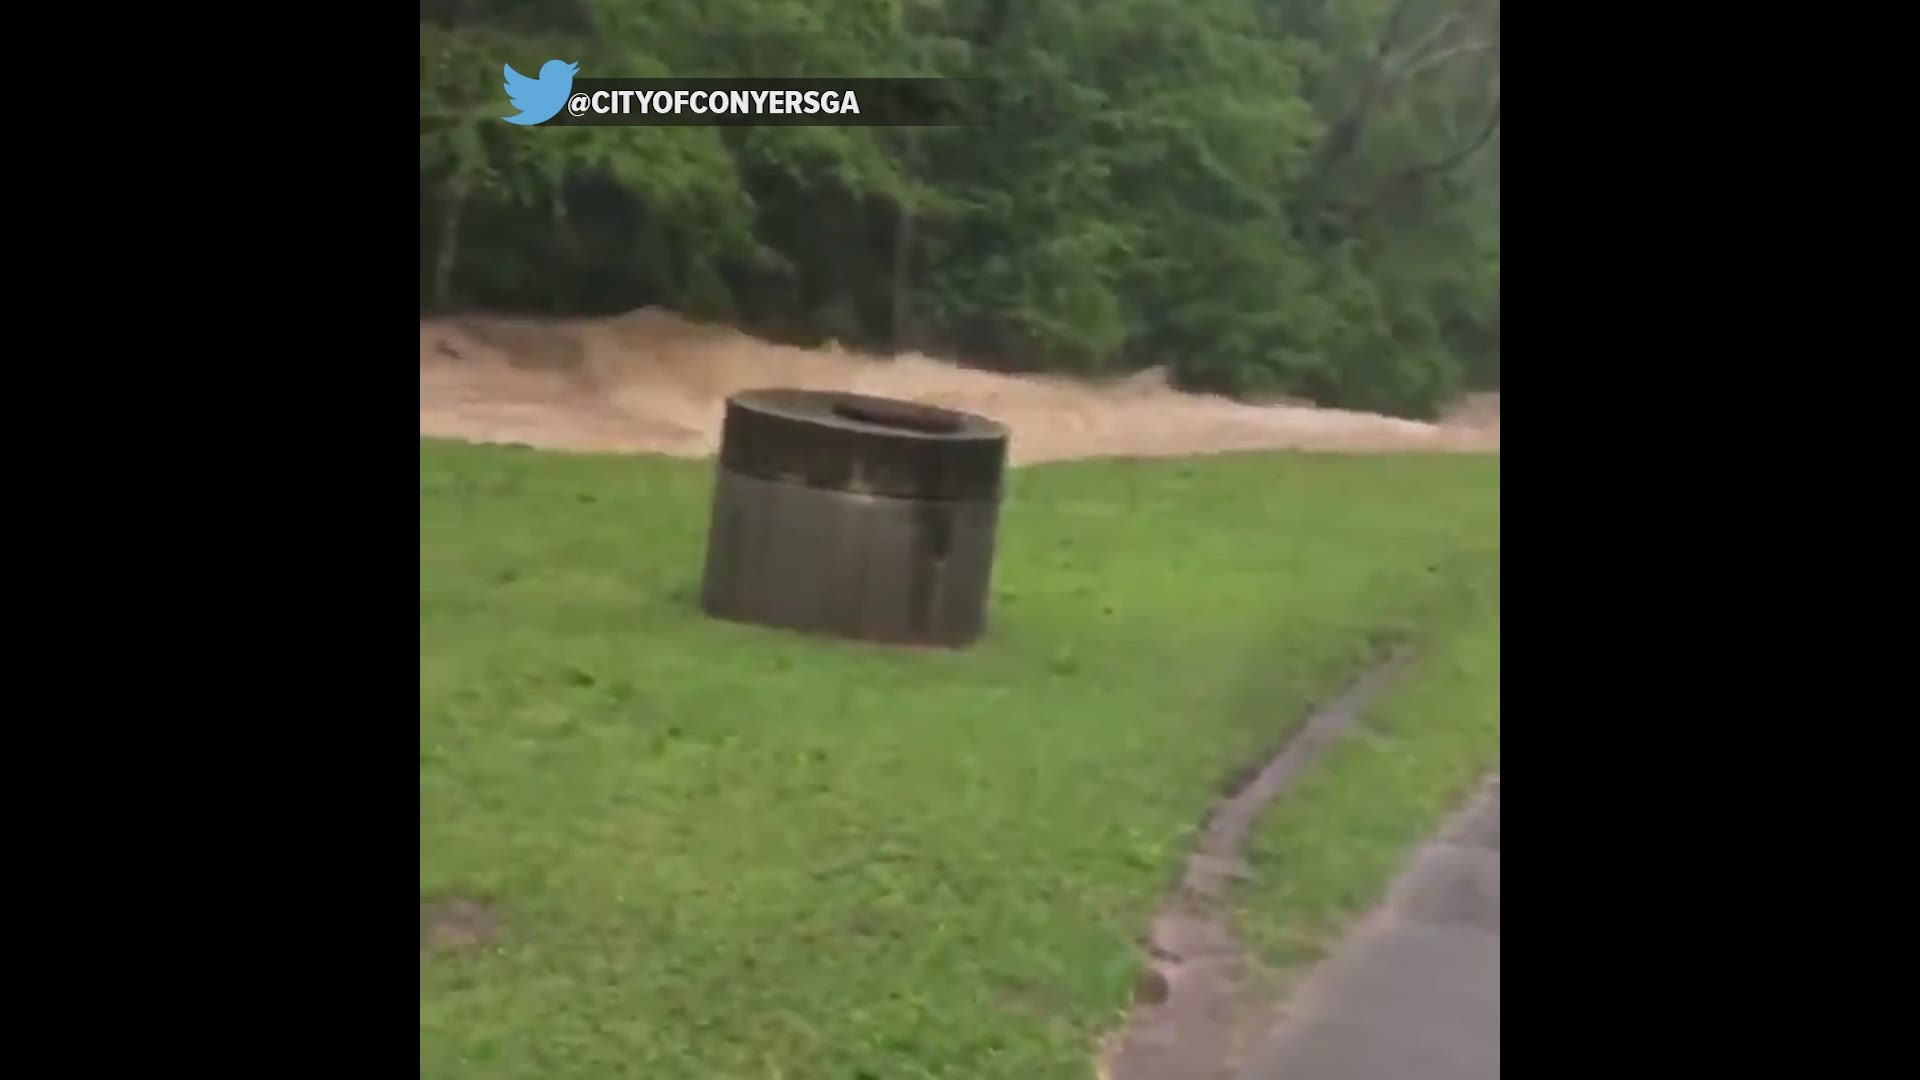 The City of Conyers shared video of quickly moving water after severe weather on April 19, 2019.